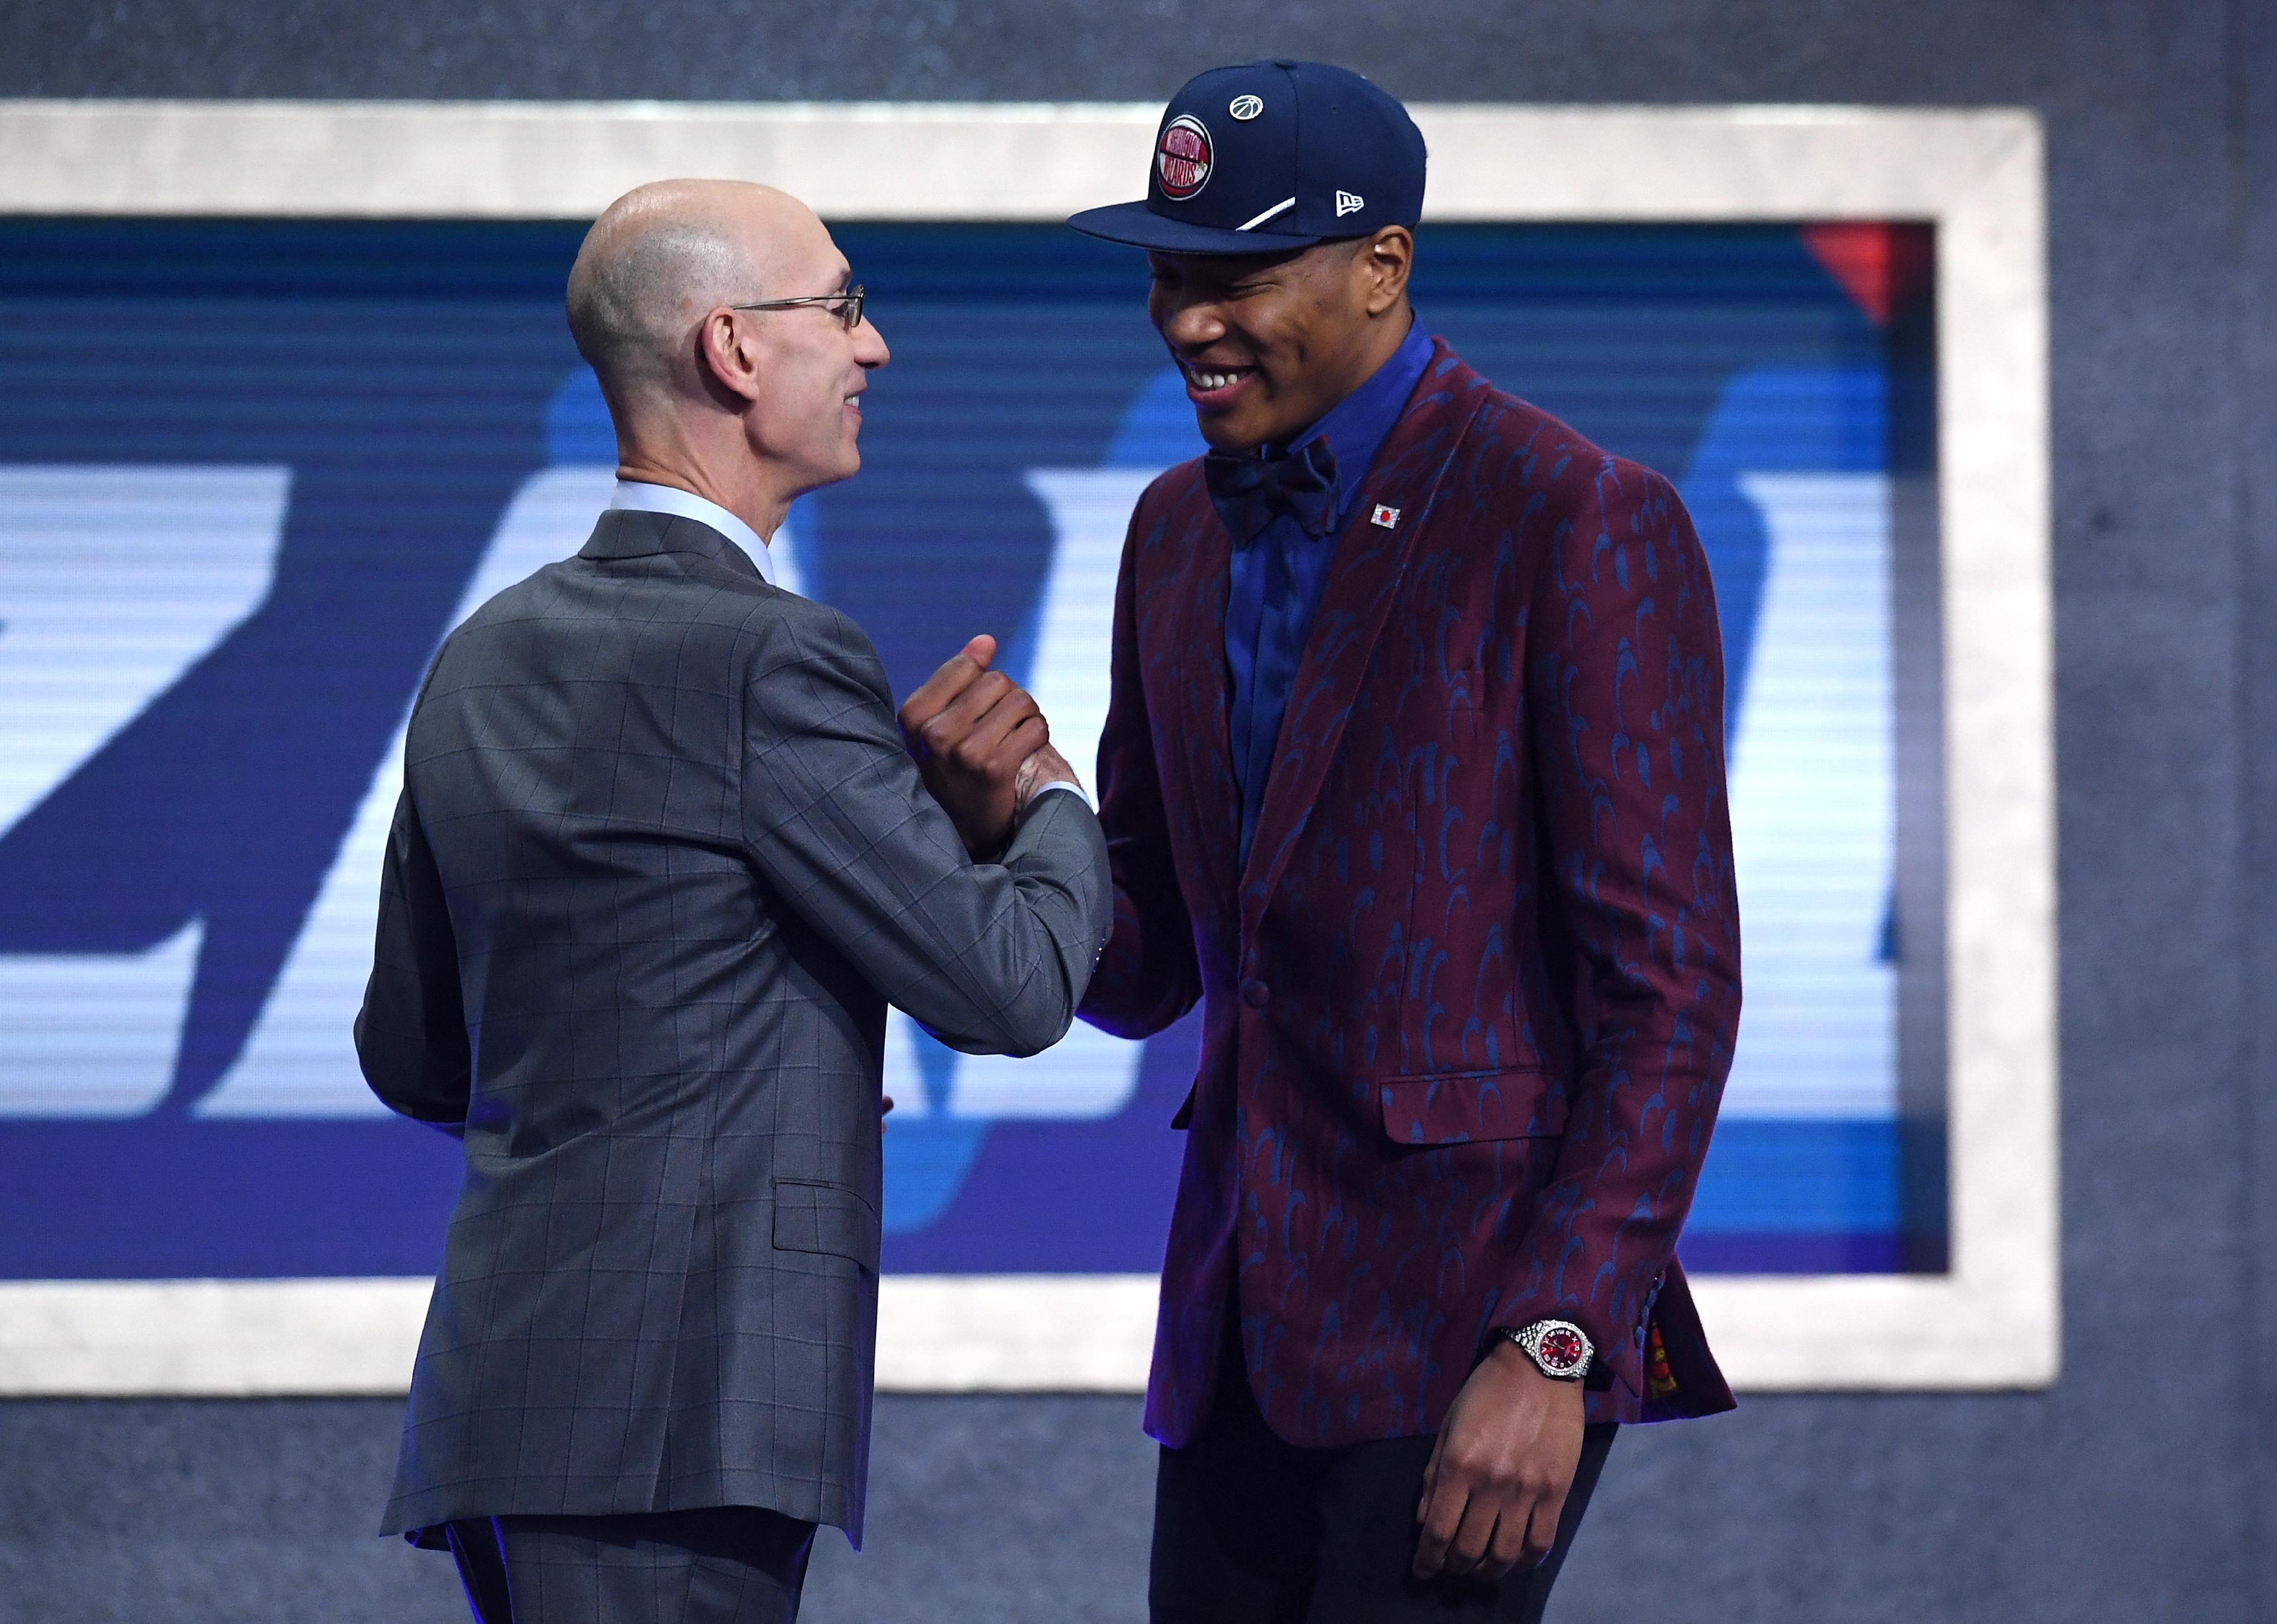 Rui Hachimura with NBA Commissioner Adam Silver after being drafted.